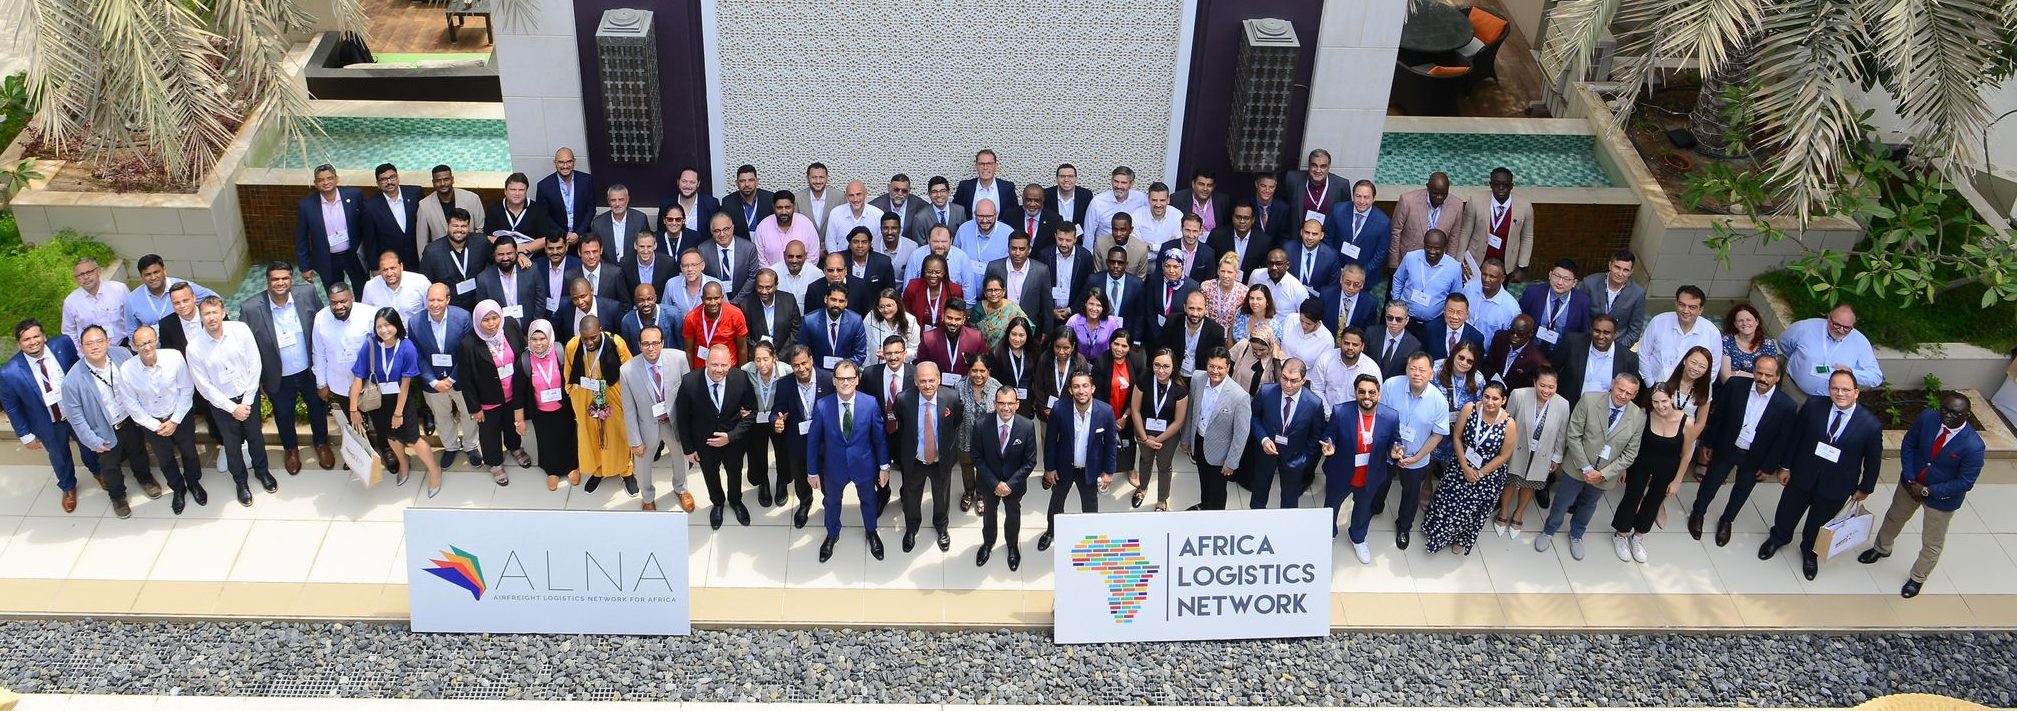 EuroBridge attends the 8th Africa Logistics Network Annual Meeting